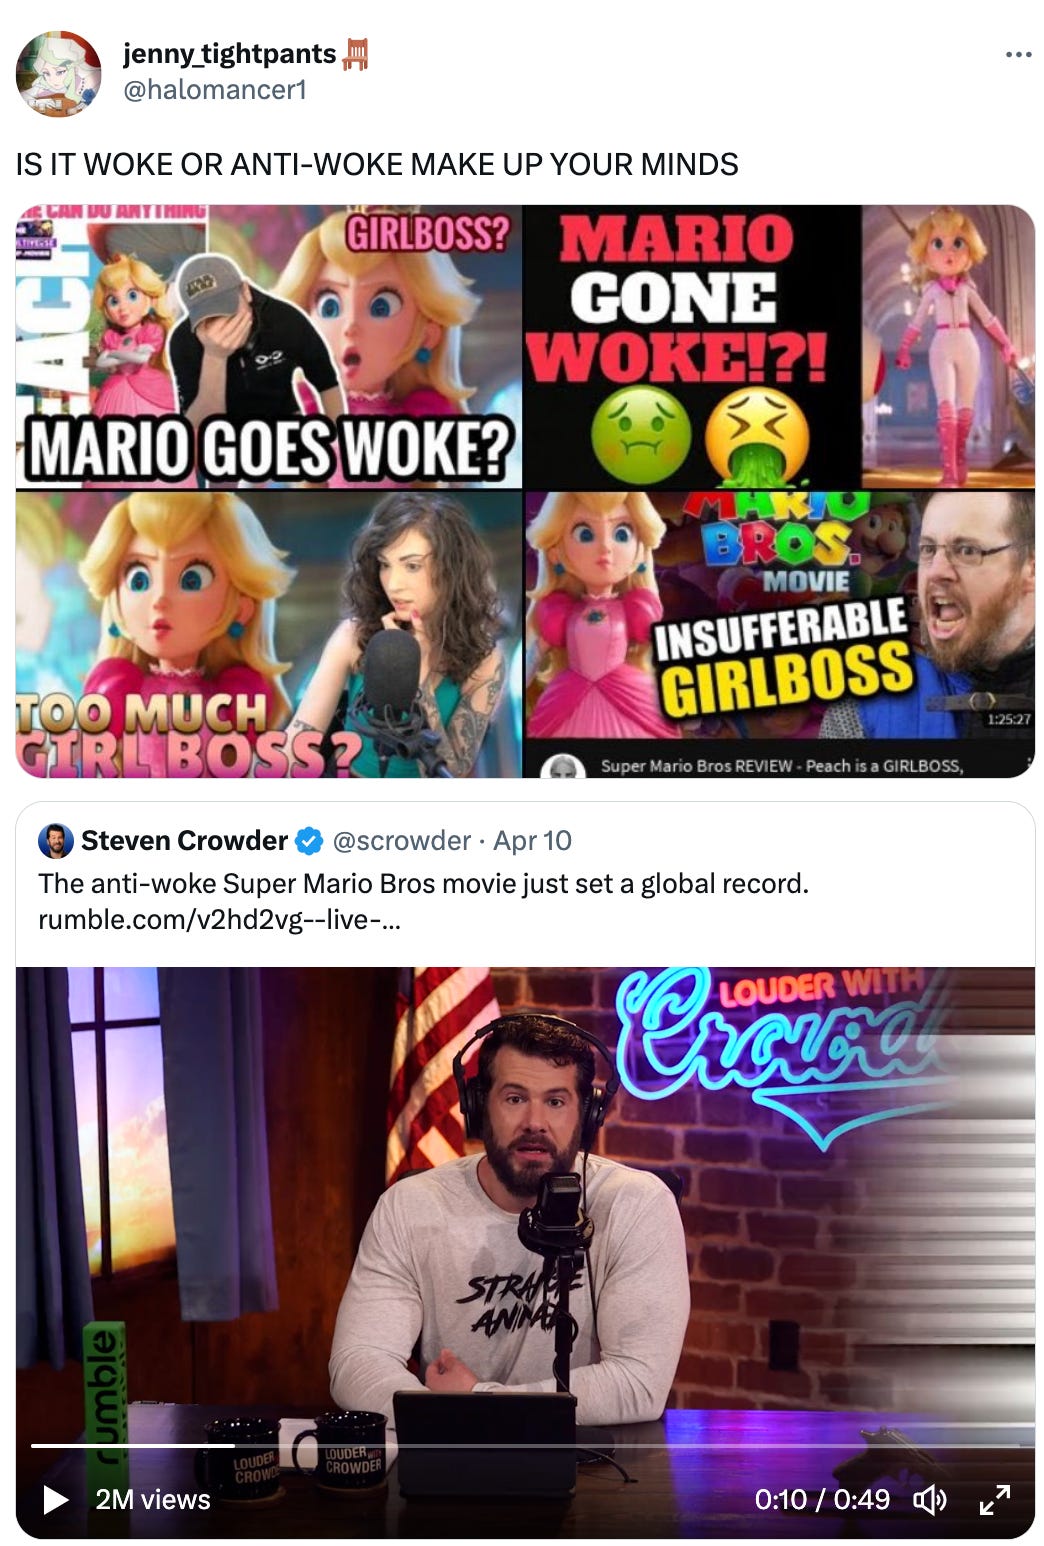 Screenshots of tweets bashing Princess Peach for being too much of a "girl boss."